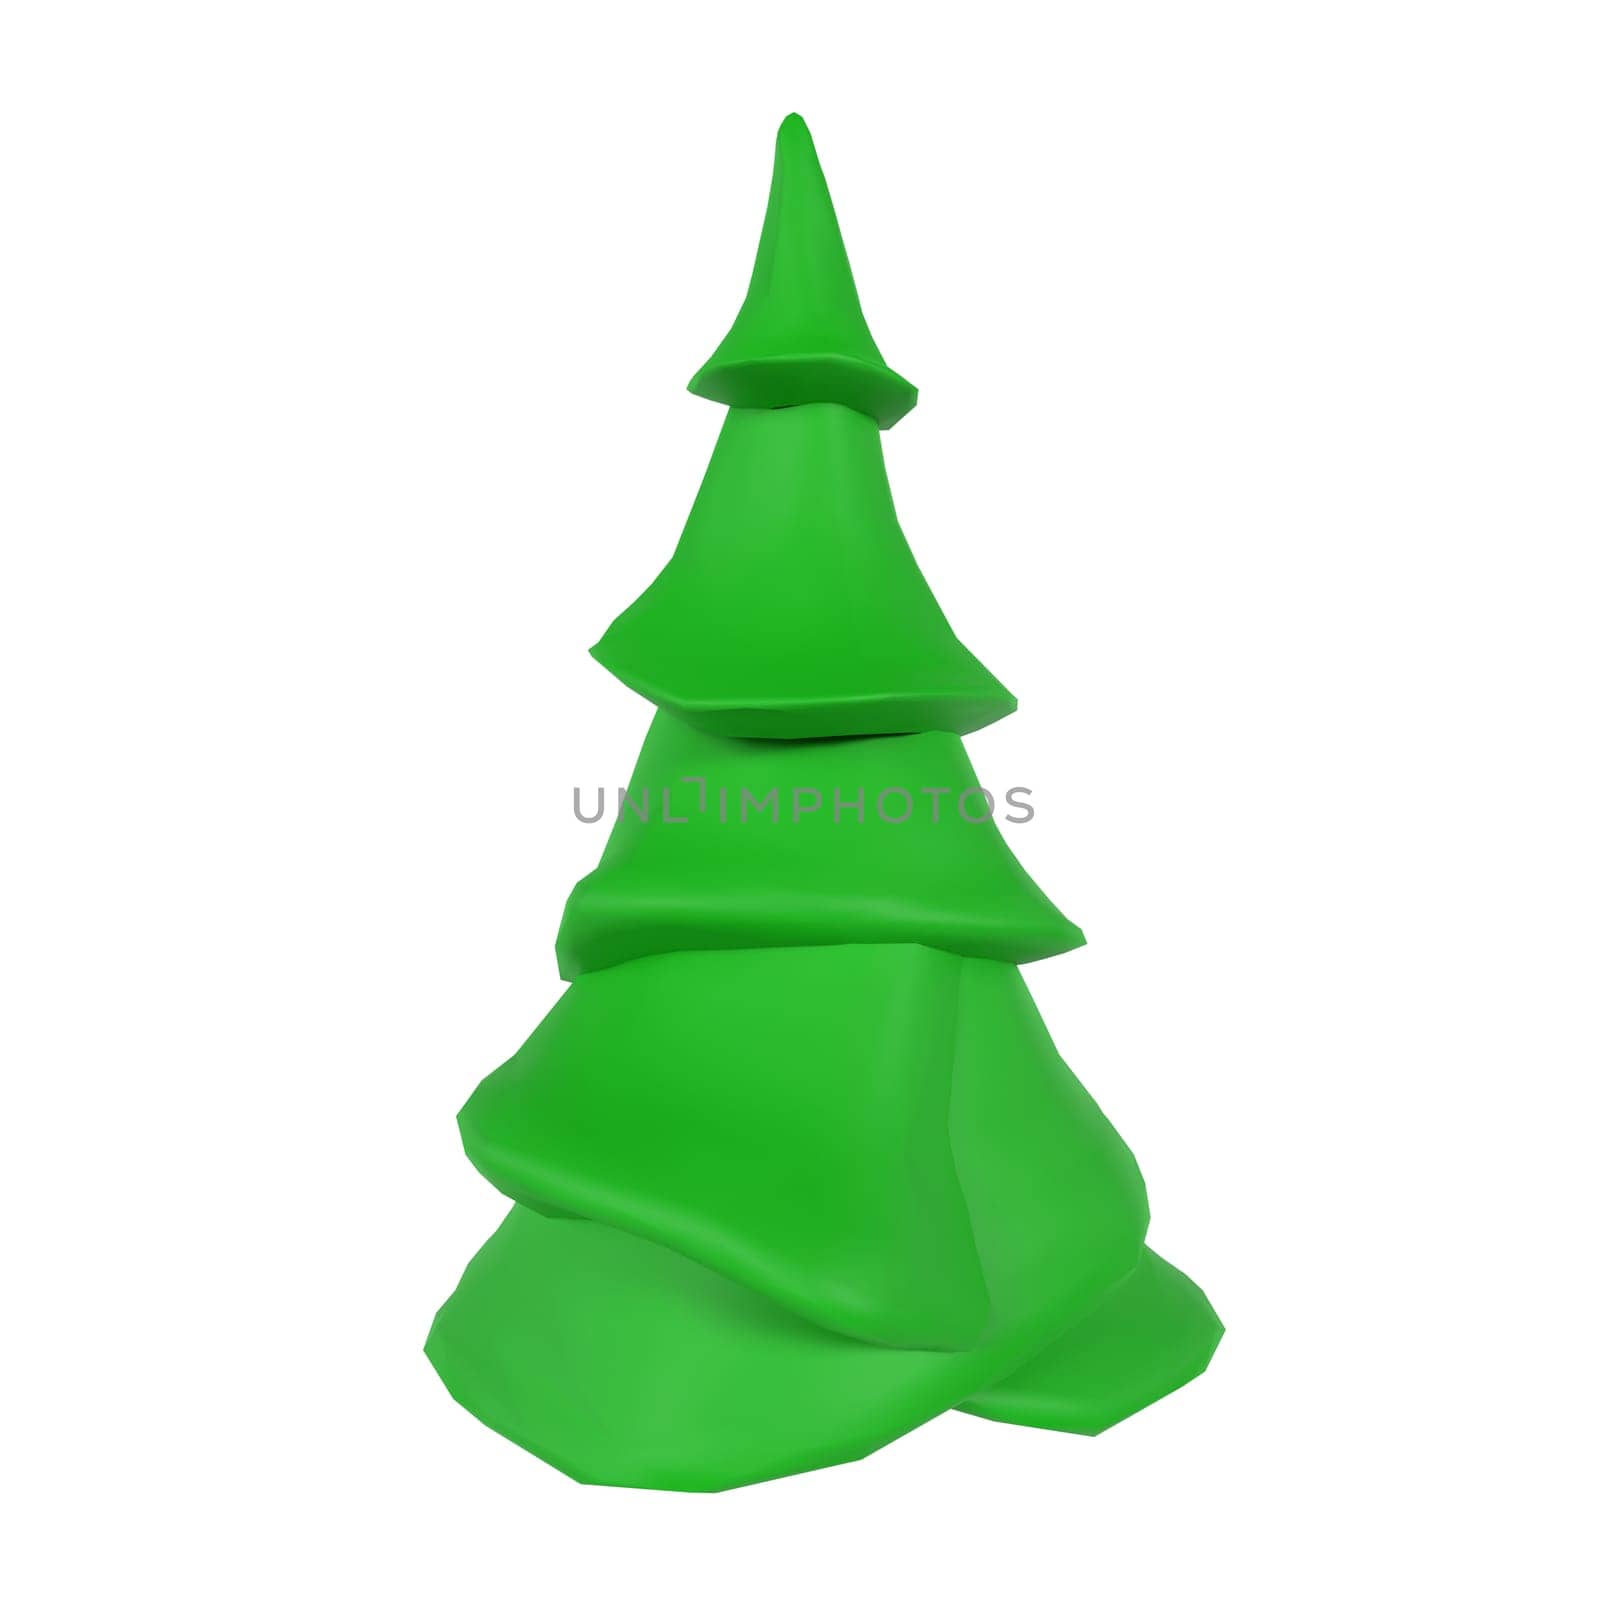 Tree isolated on white background. High quality 3d illustration